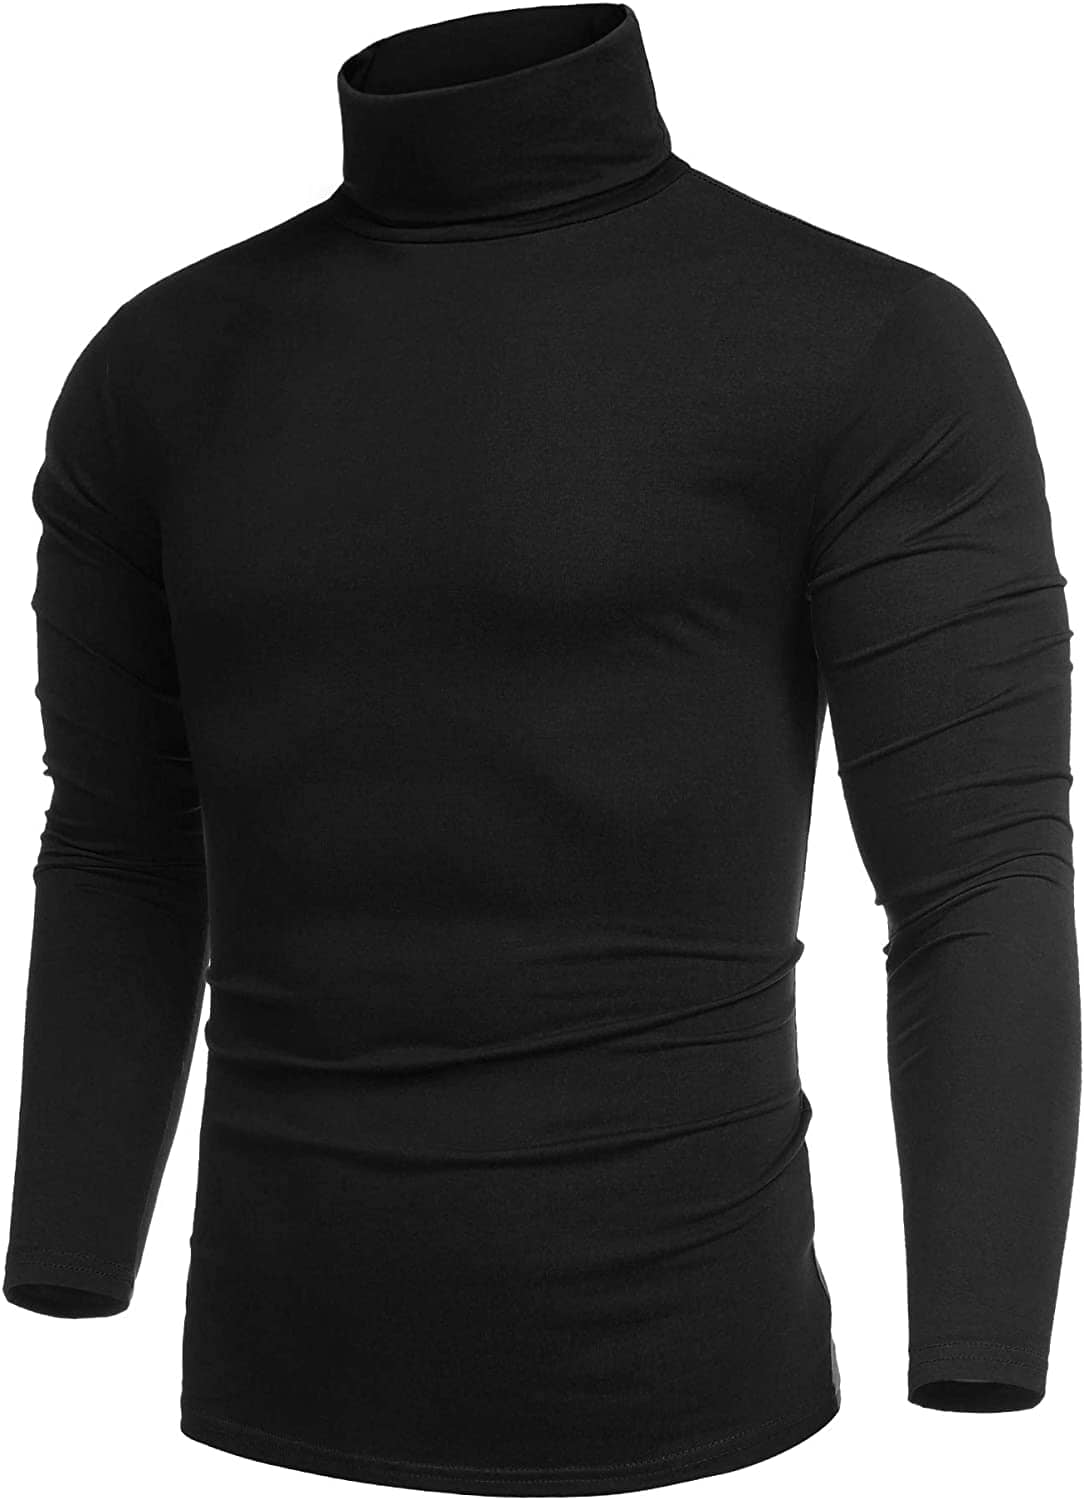 Slim Fit Turtleneck Basic Cotton Sweater (US Only) Sweaters COOFANDY Store Black S 